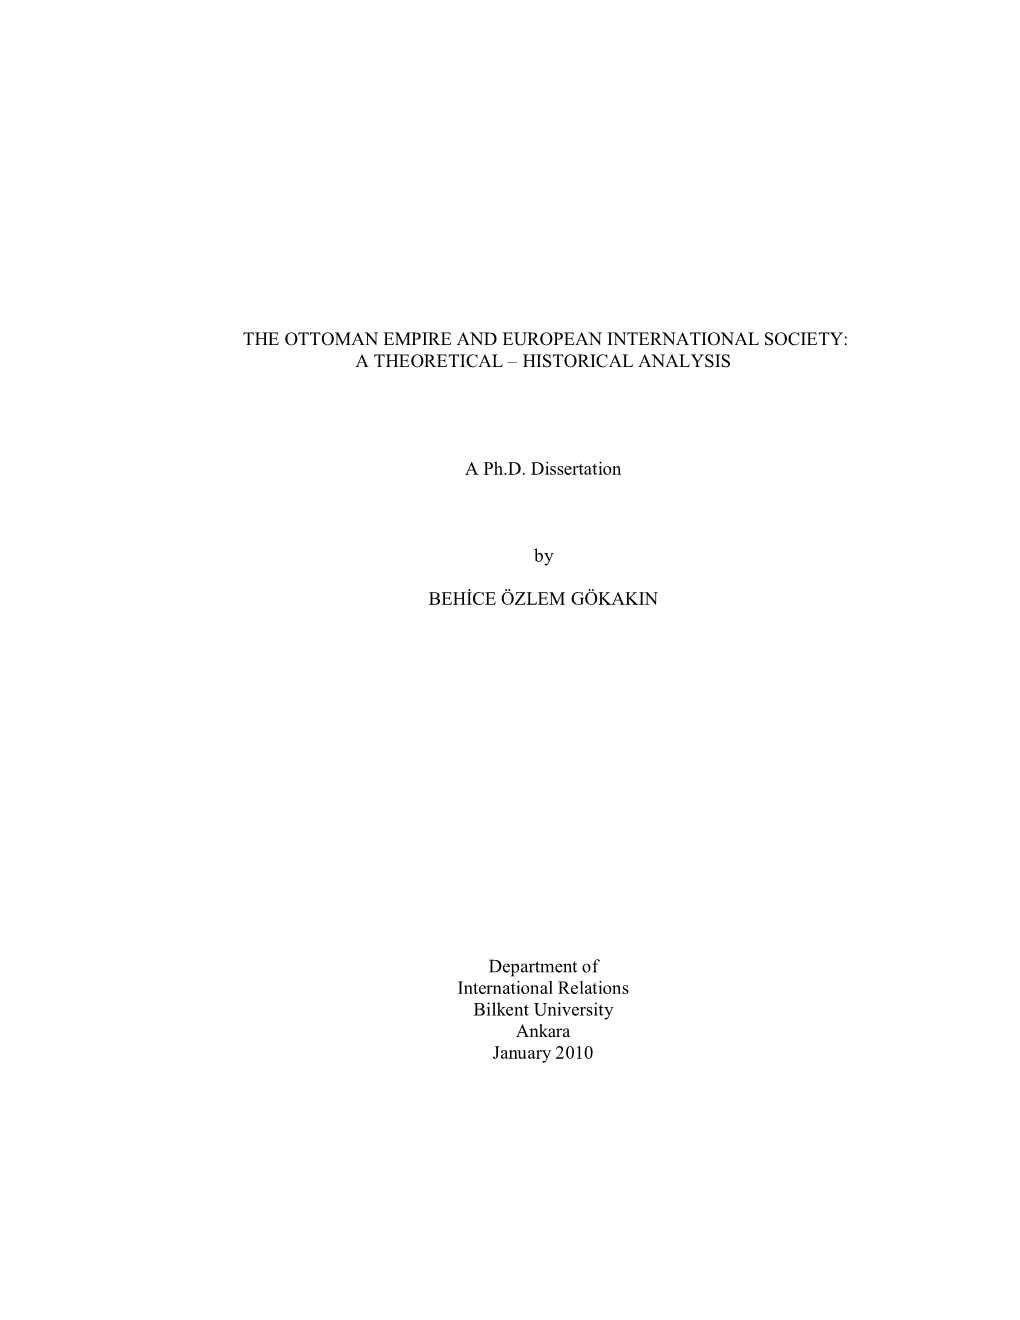 The Ottoman Empire and European International Society: a Theoretical – Historical Analysis